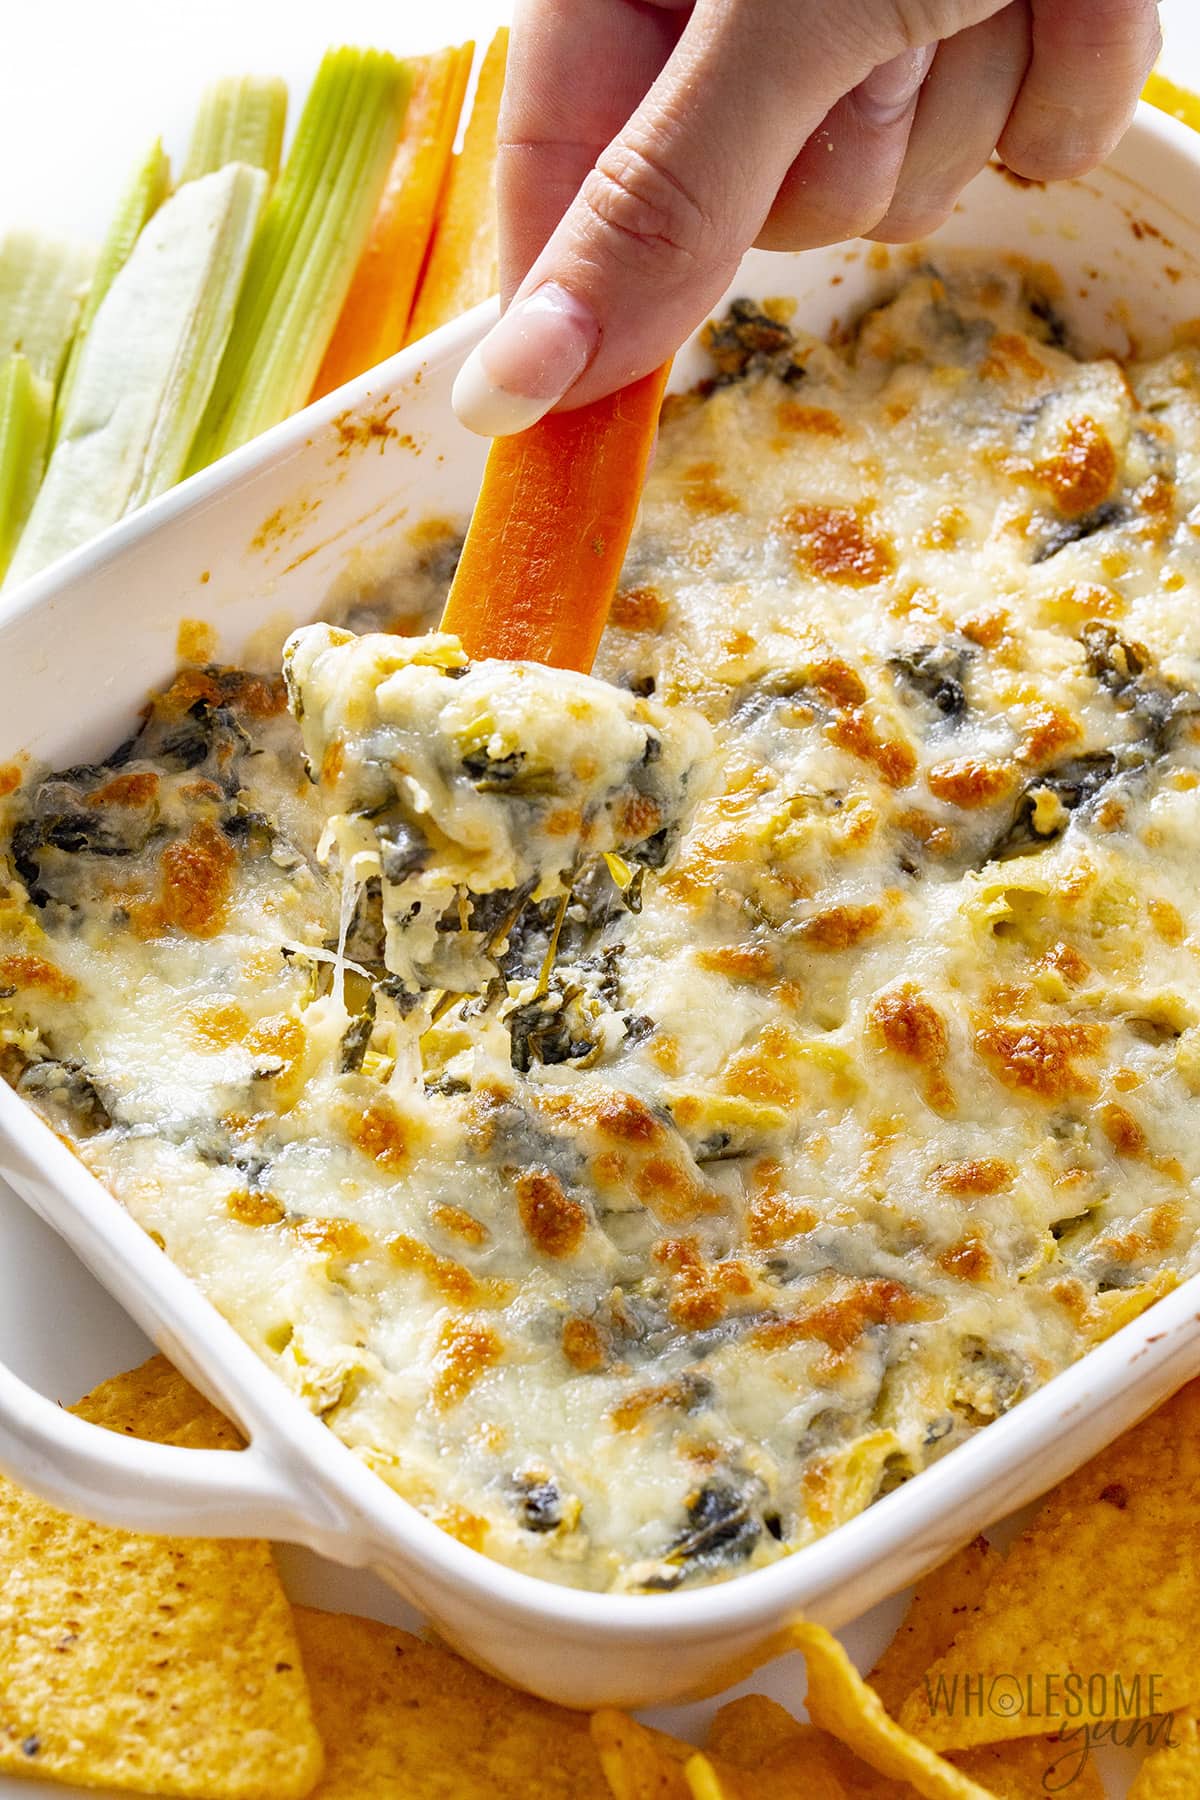 Use carrot sticks to scoop up an easy spinach artichoke dip.